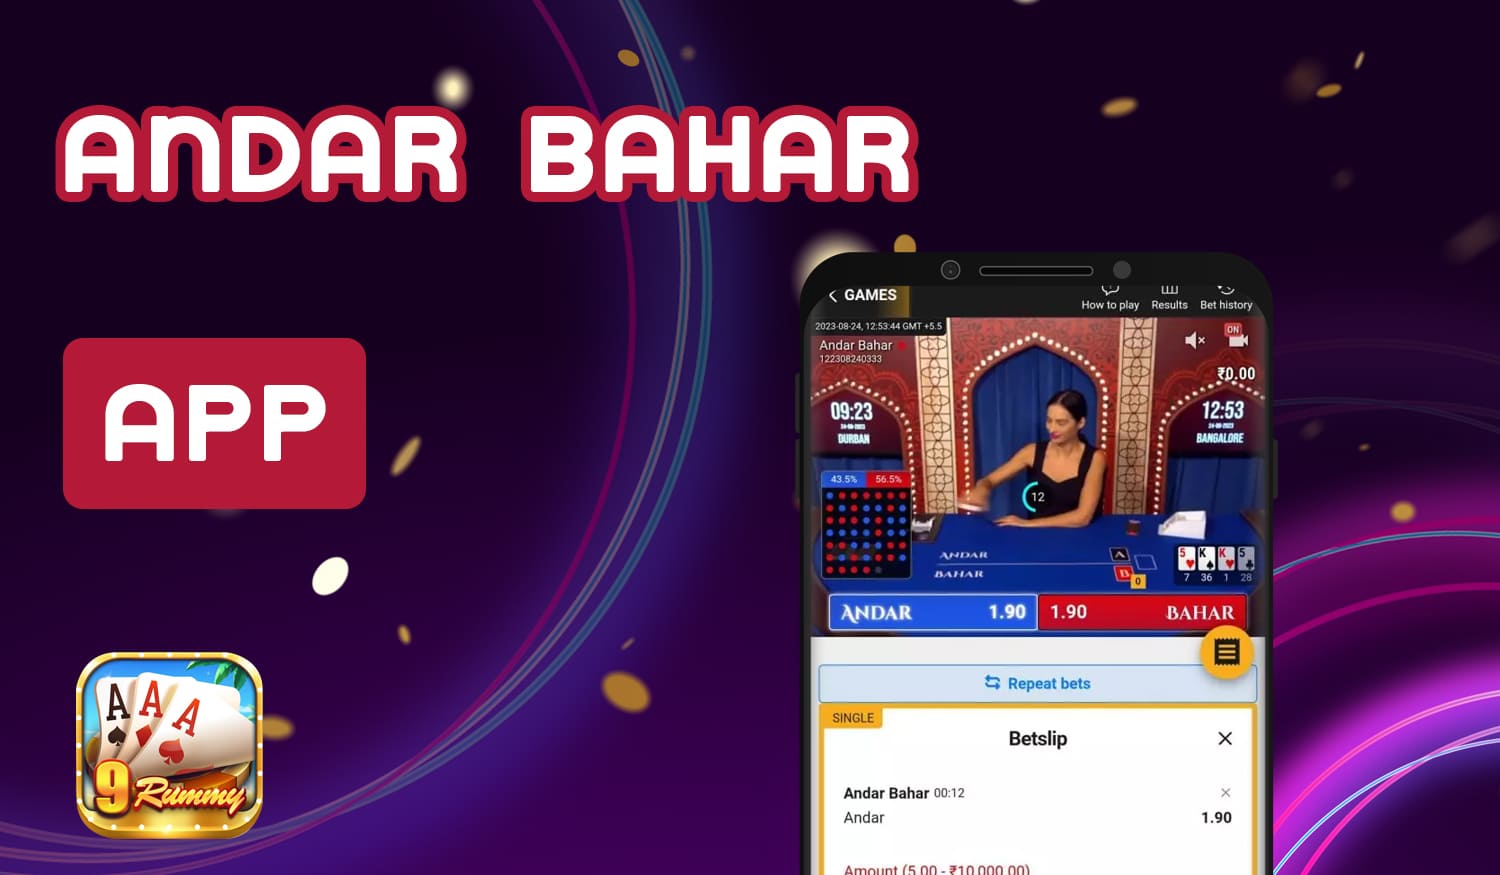 9 Rummy mobile app for playing Andar Bahar